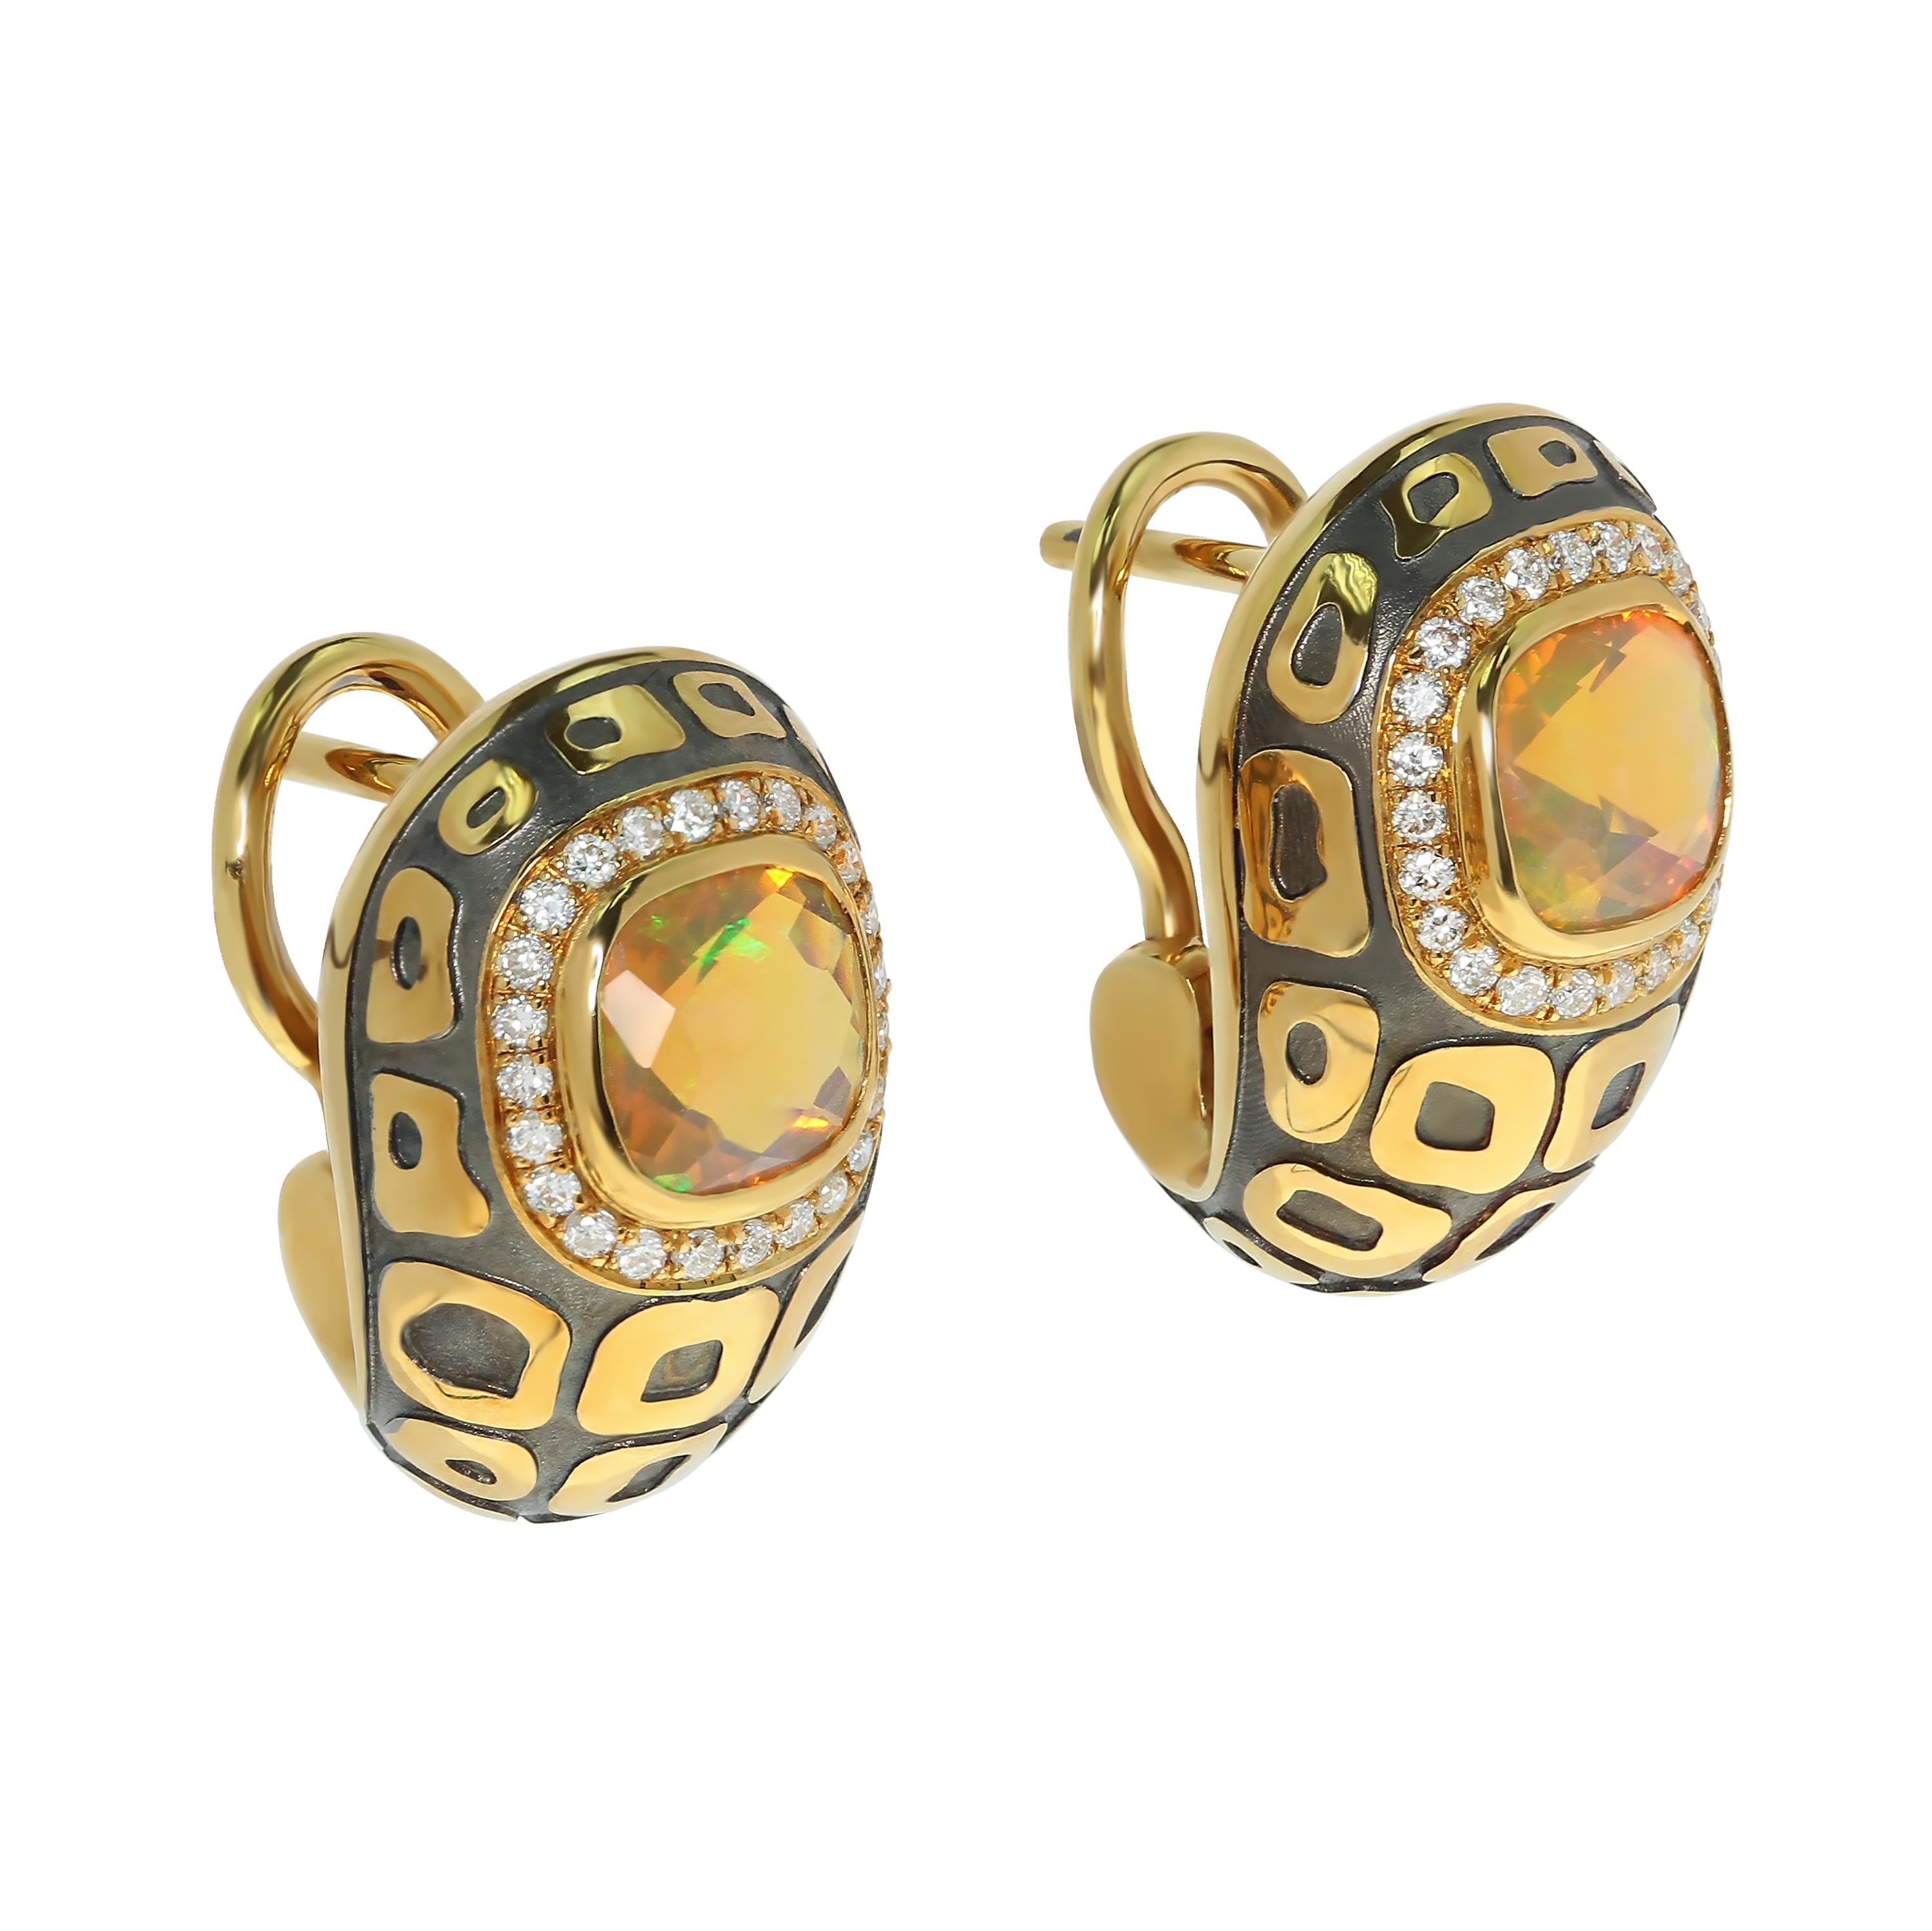 Ethiopian Opal 0.99 Carat Diamonds 18 Karat Yellow and Black Gold Earrings
Looking at the opals, it is impossible to look away. In the case of these Earrings as well. The combination of orange, green, and blue shades of these two astounding 0.99